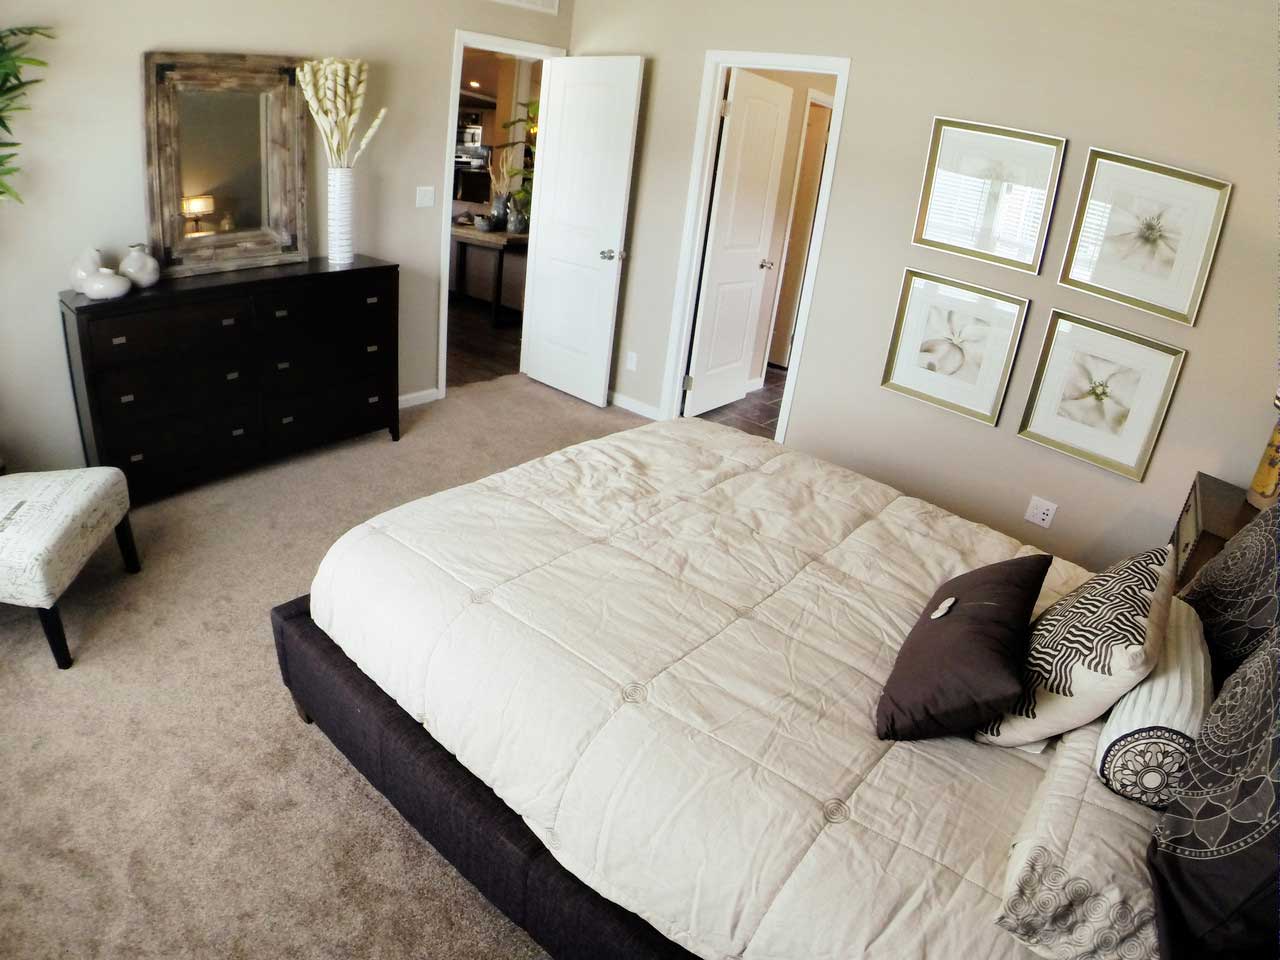 Cozy and inviting, this bedroom features a white queen sized bed, soft carpet flooring, and a stylish dresser for all your storage needs.